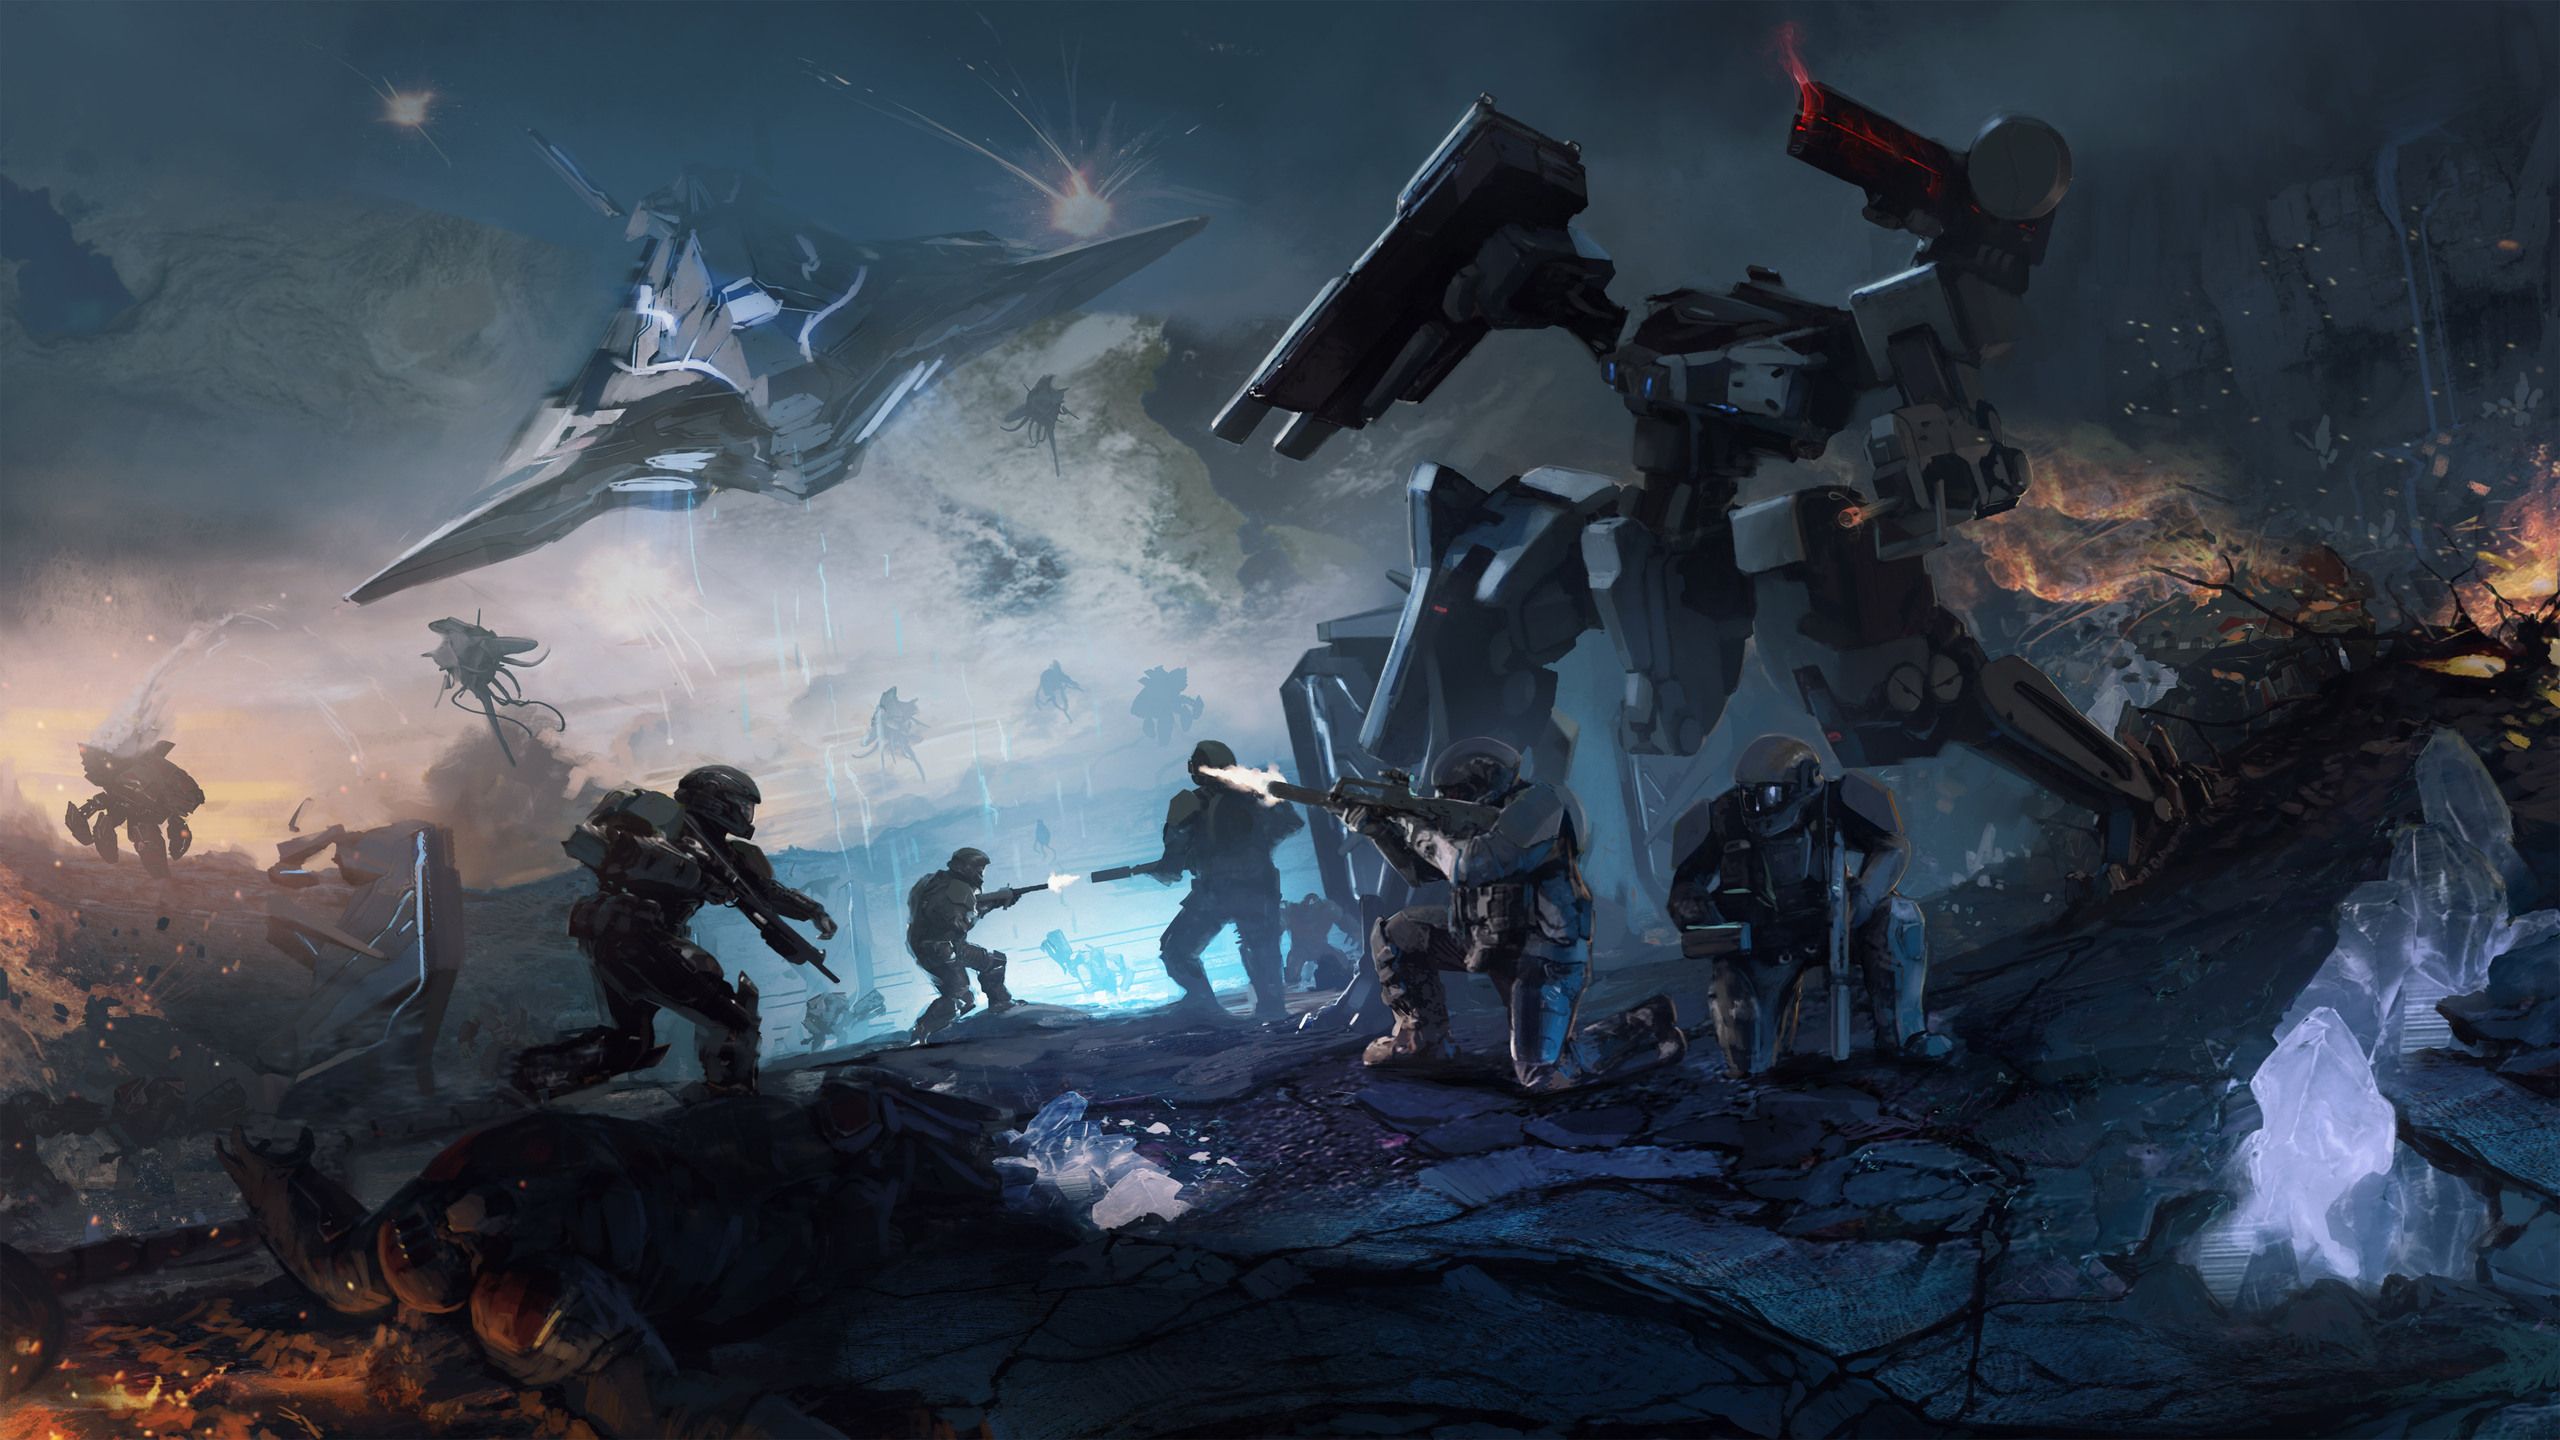 Halo Wars 2 Wallpapers